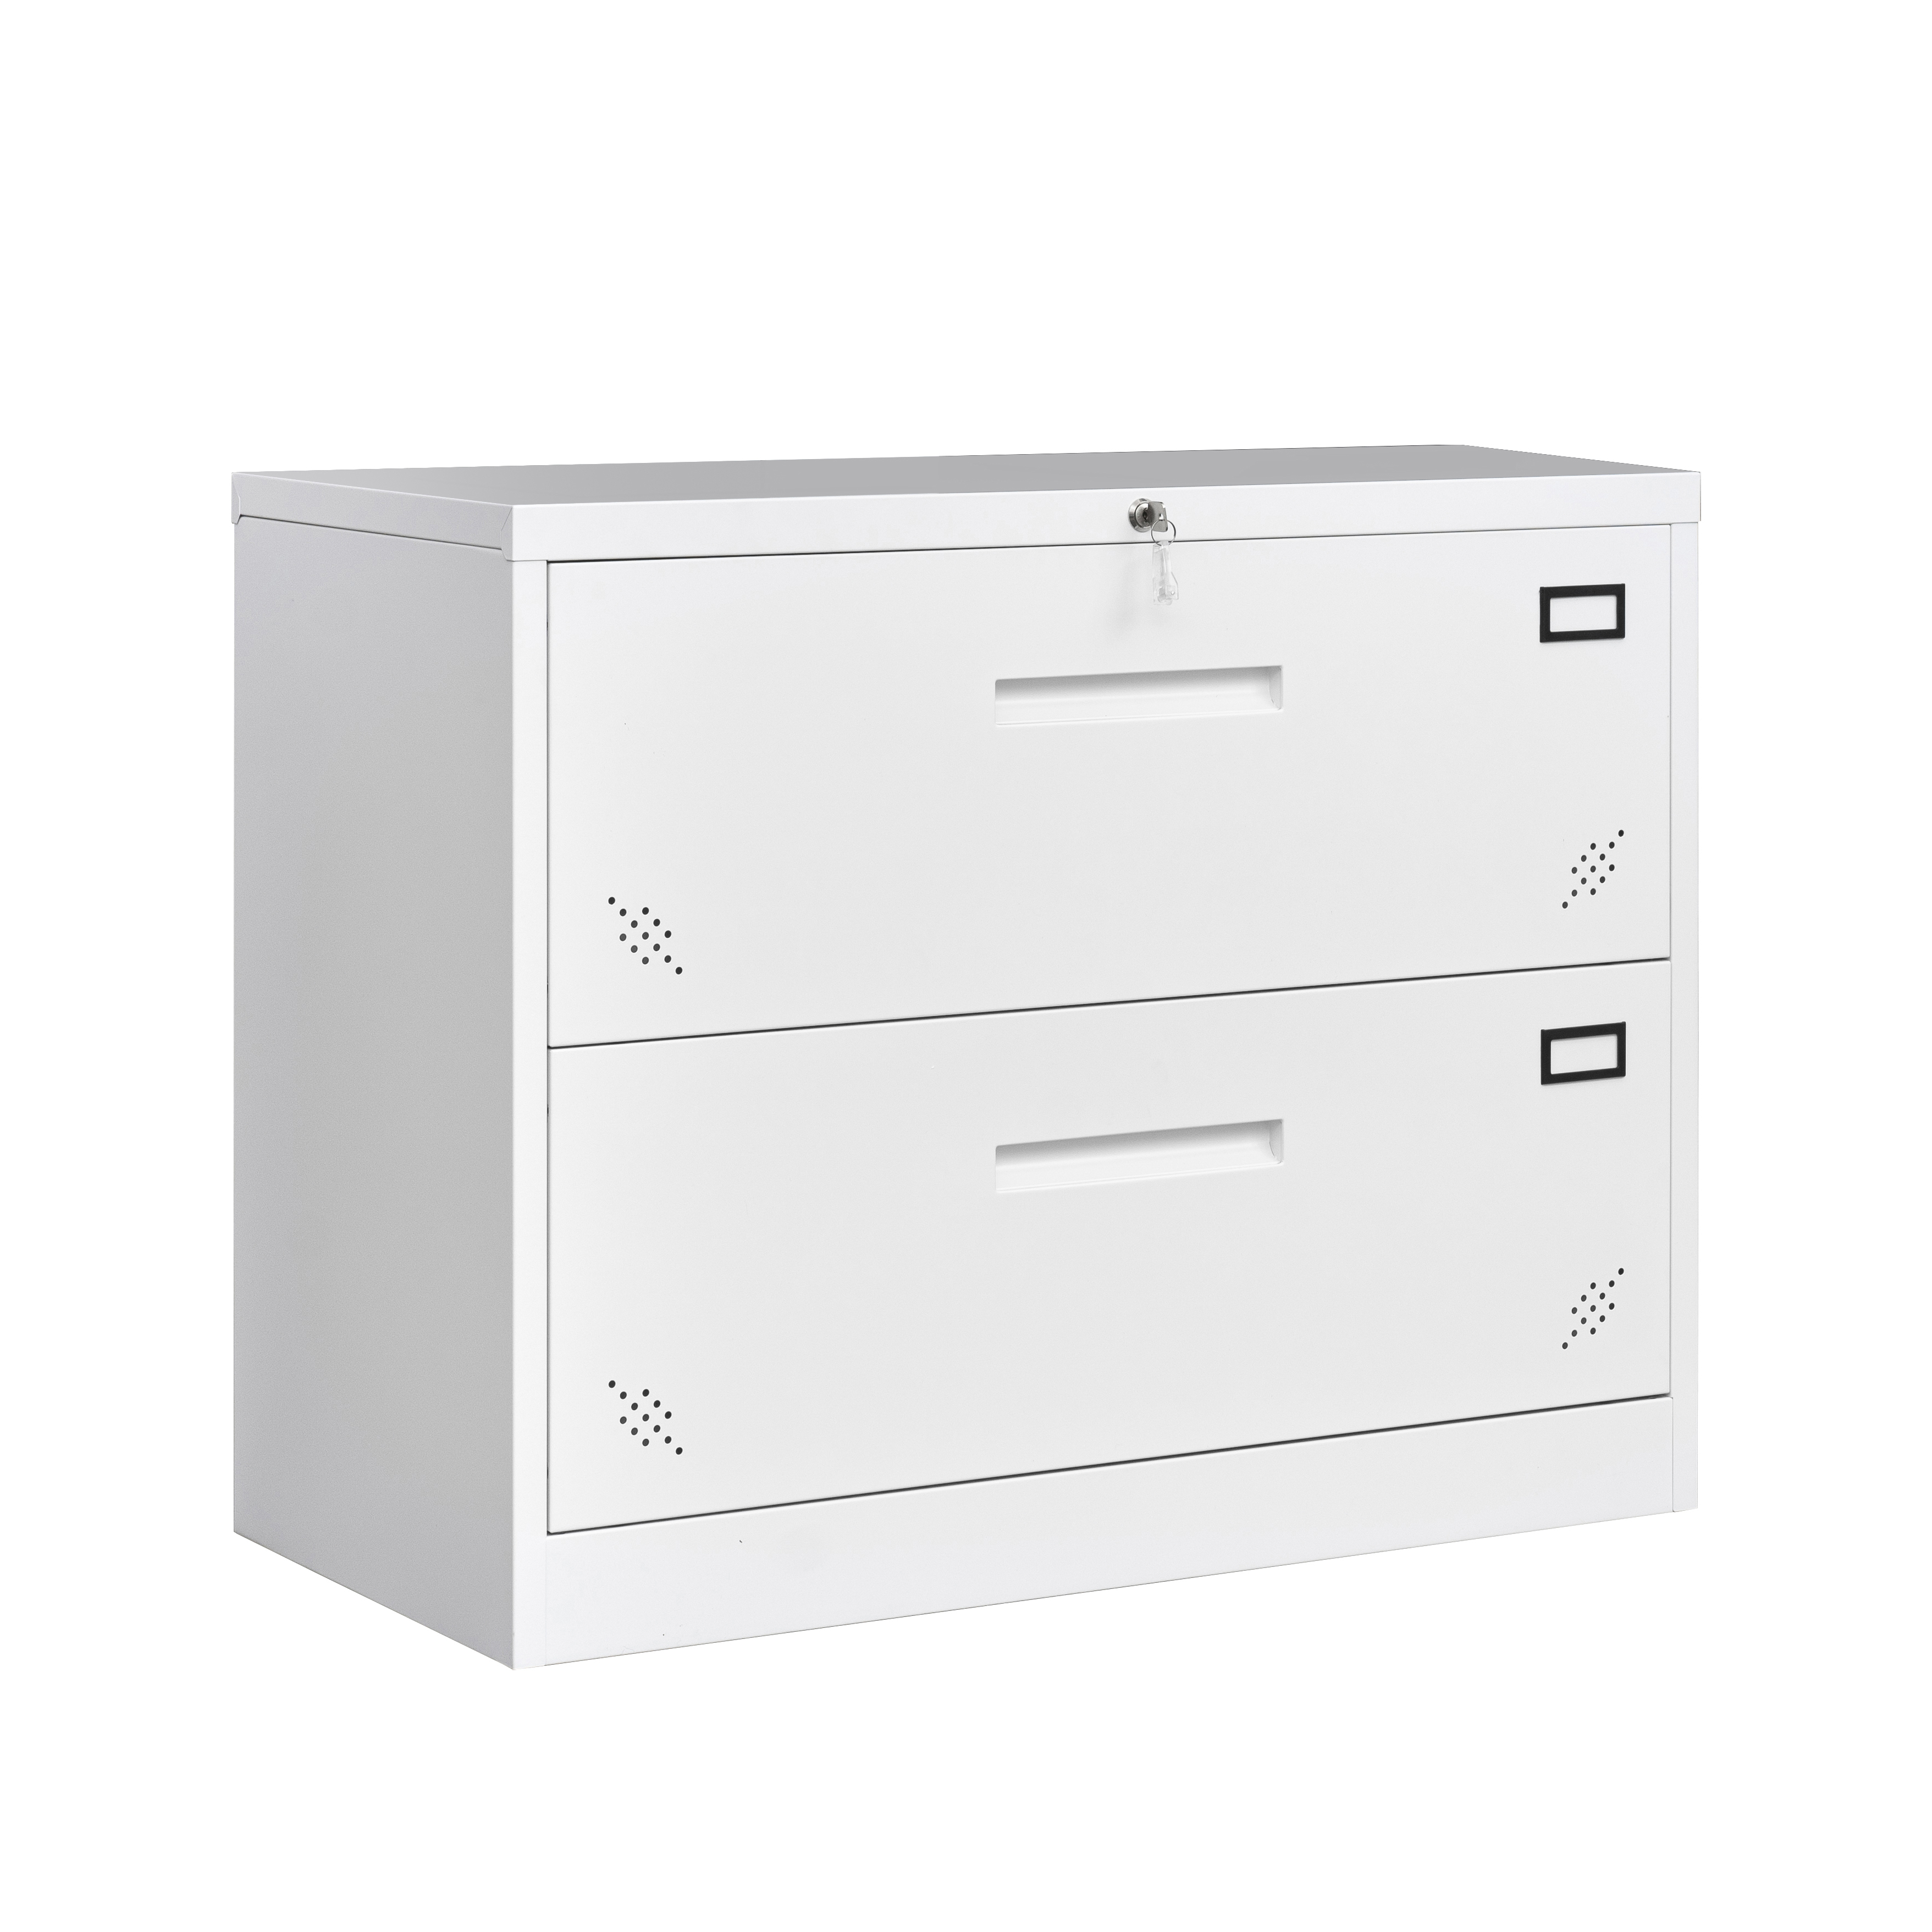 Lateral File Cabinet with Lock, 2 Drawer Lateral Filing Cabinet, Large Deep Drawers Locked by Keys, Metal Storage File Cabinet for Hanging Files Letter/Legal/F4/A4 Size, White - image 4 of 6